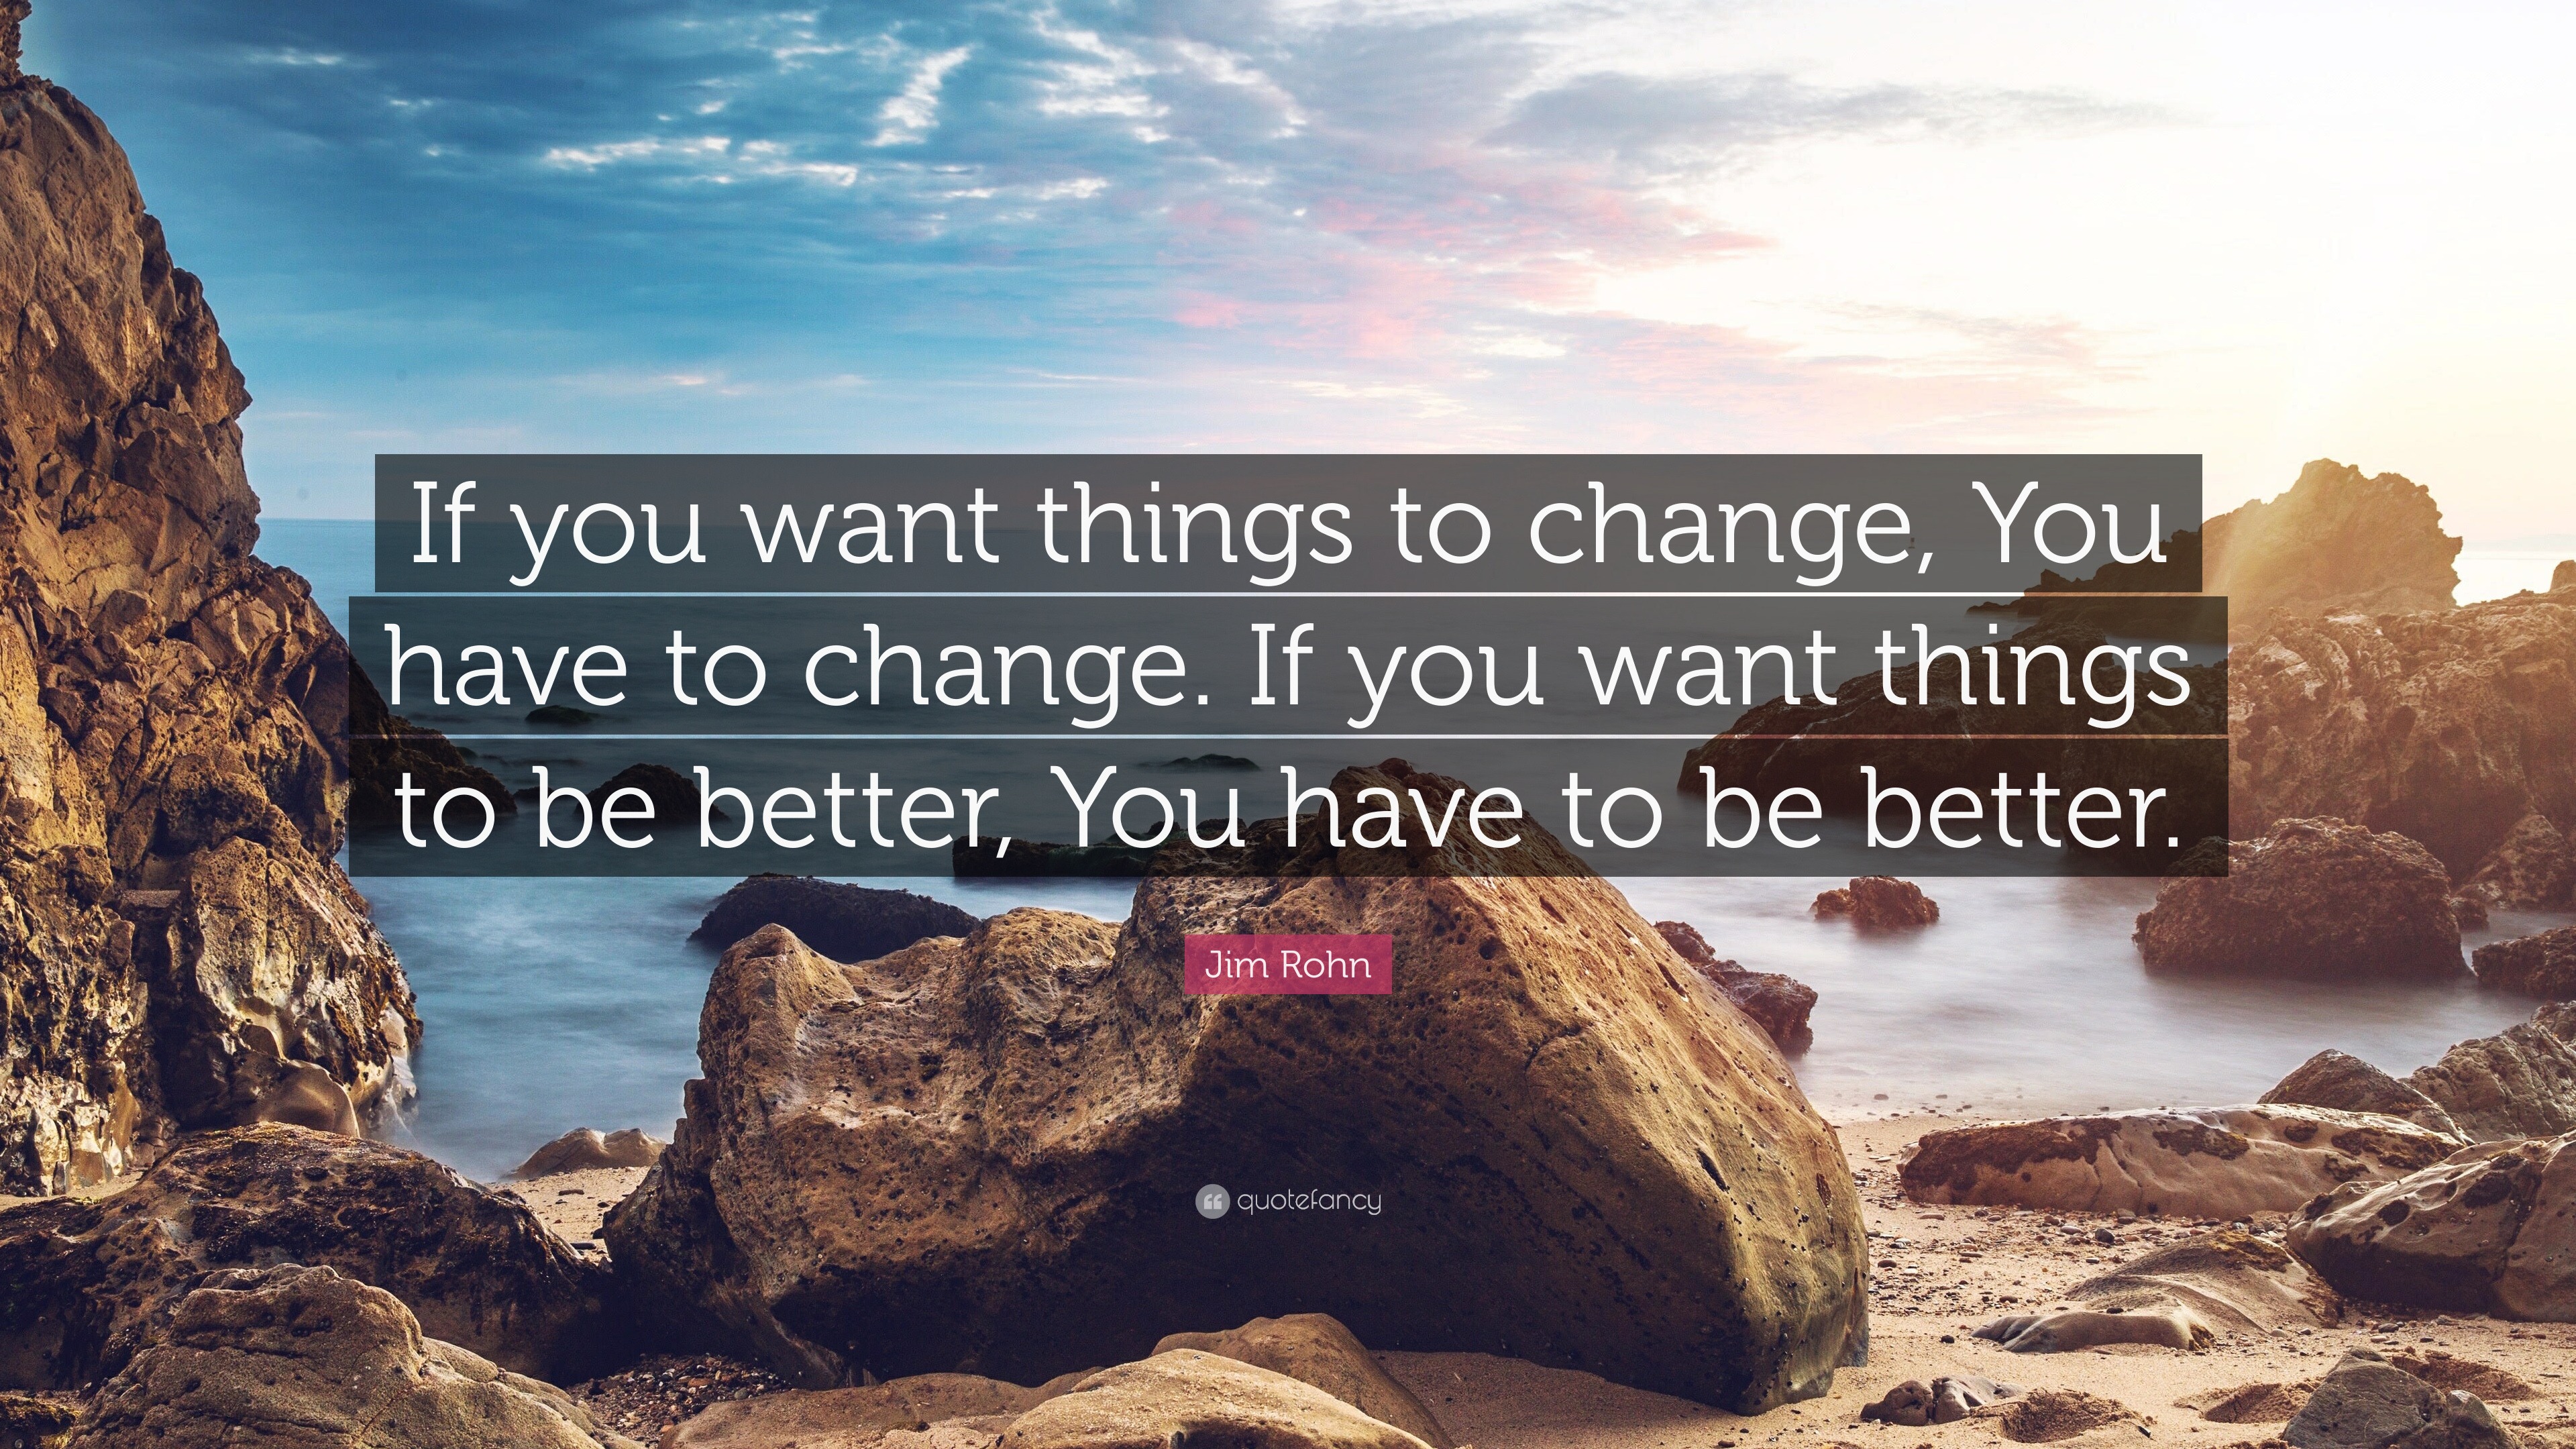 Jim Rohn Quote “If you want things to change, You have to change. If